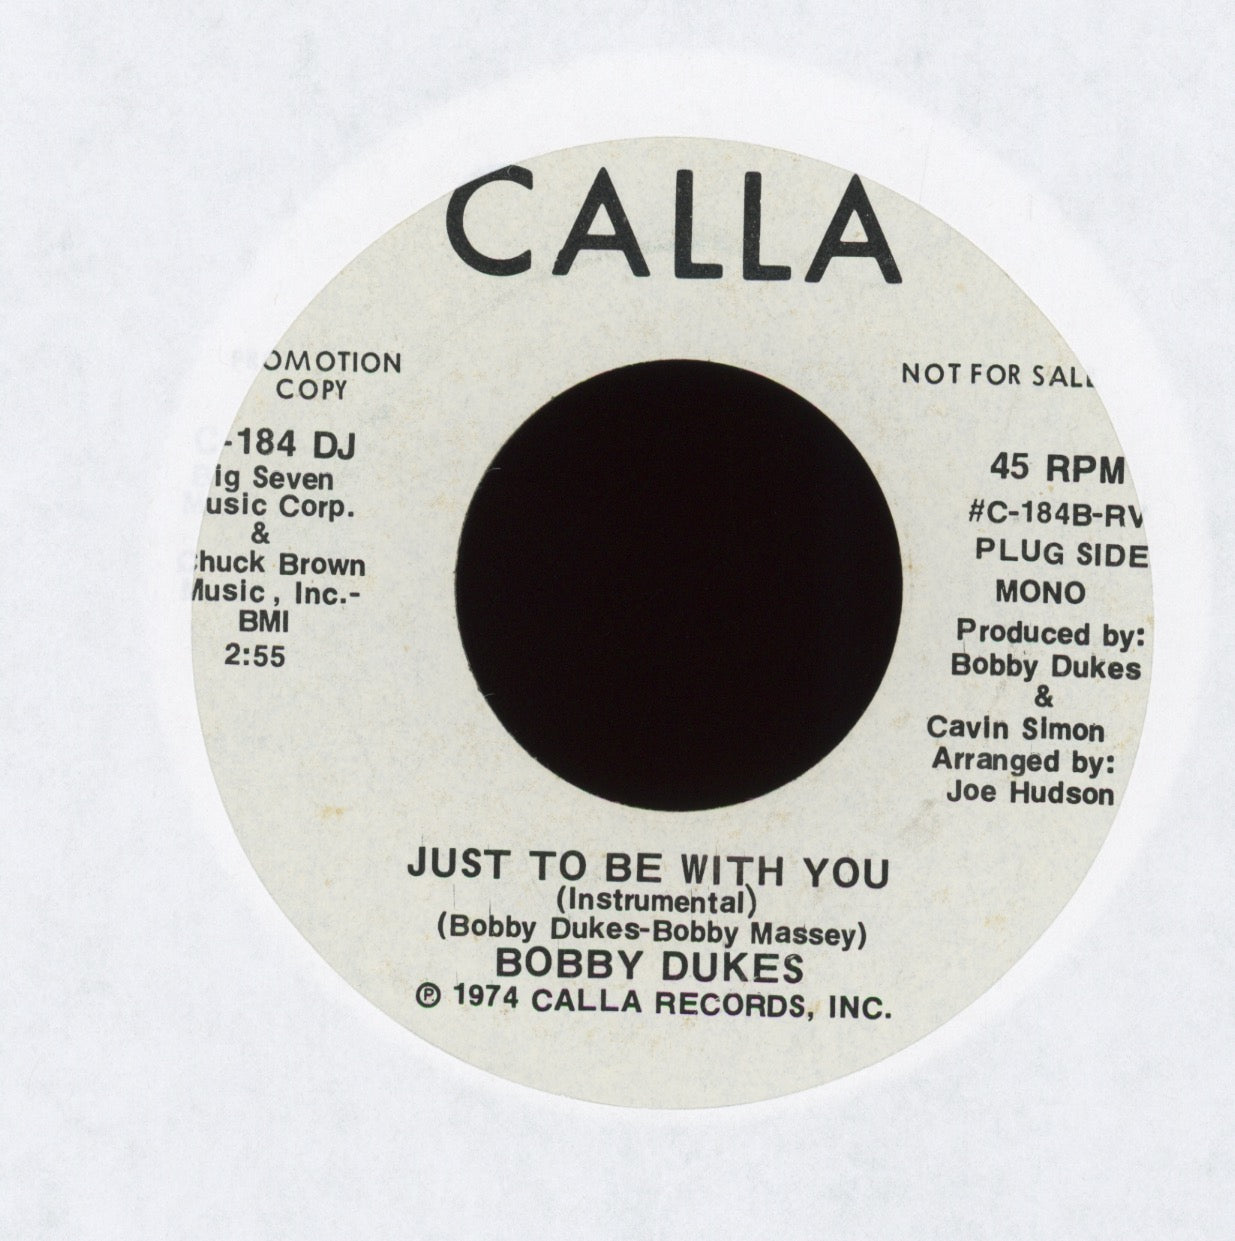 Robert Dukes - Just To Be With You (Instrumental) on Calla Promo Northern Soul 45